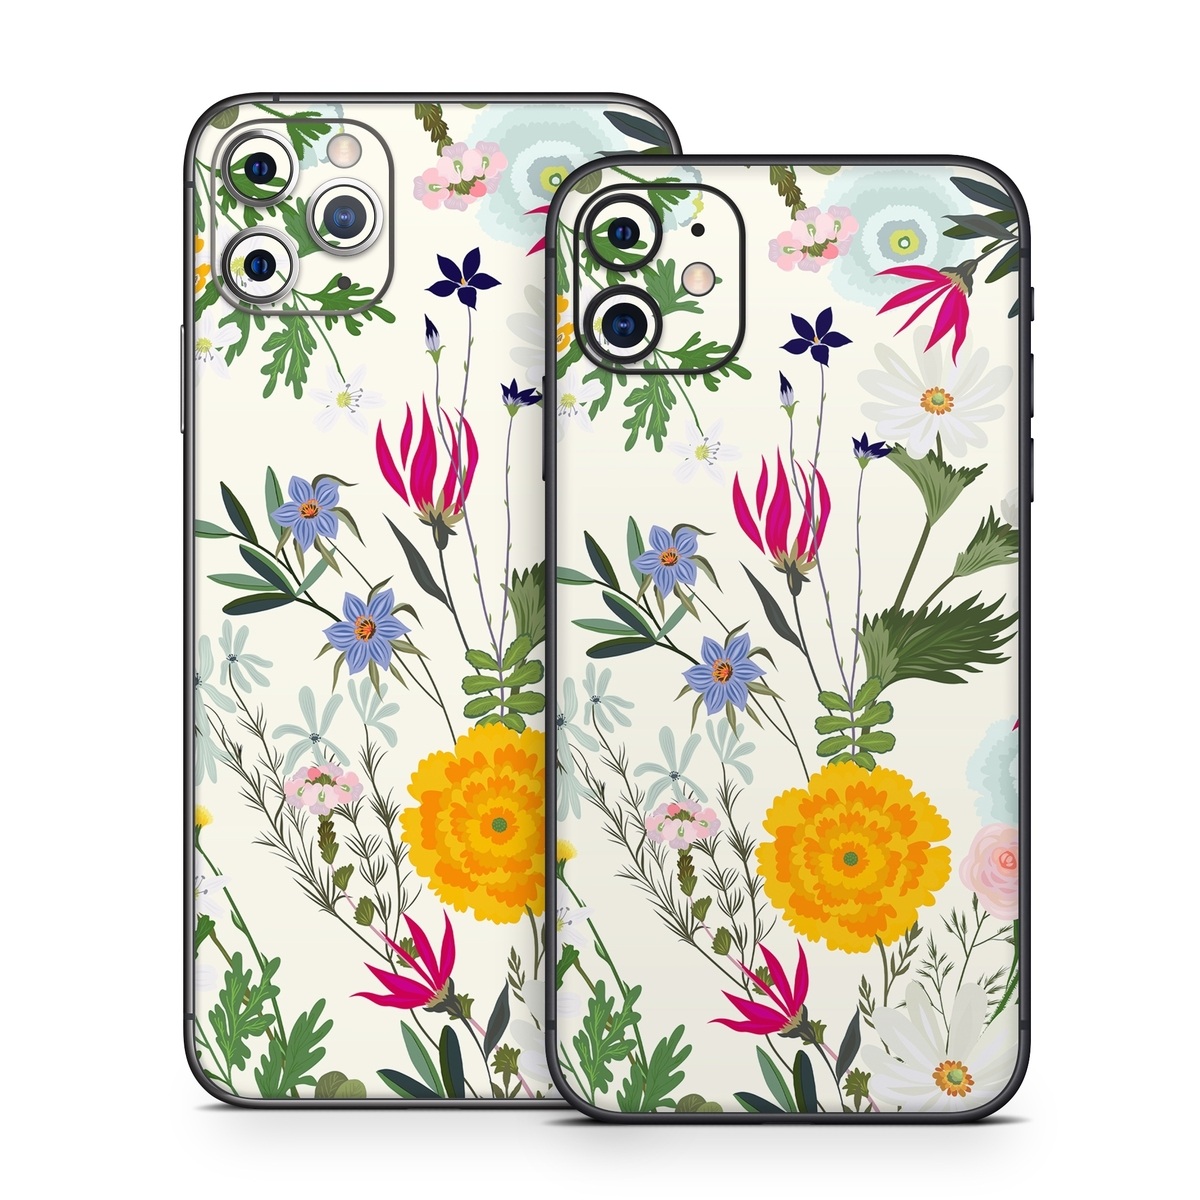  Skin design of Flower, Wildflower, chamomile, Floral design, Plant, camomile, Botany, Clip art, Cut flowers, Daisy, with white, green, pink, orange, yellow, red colors